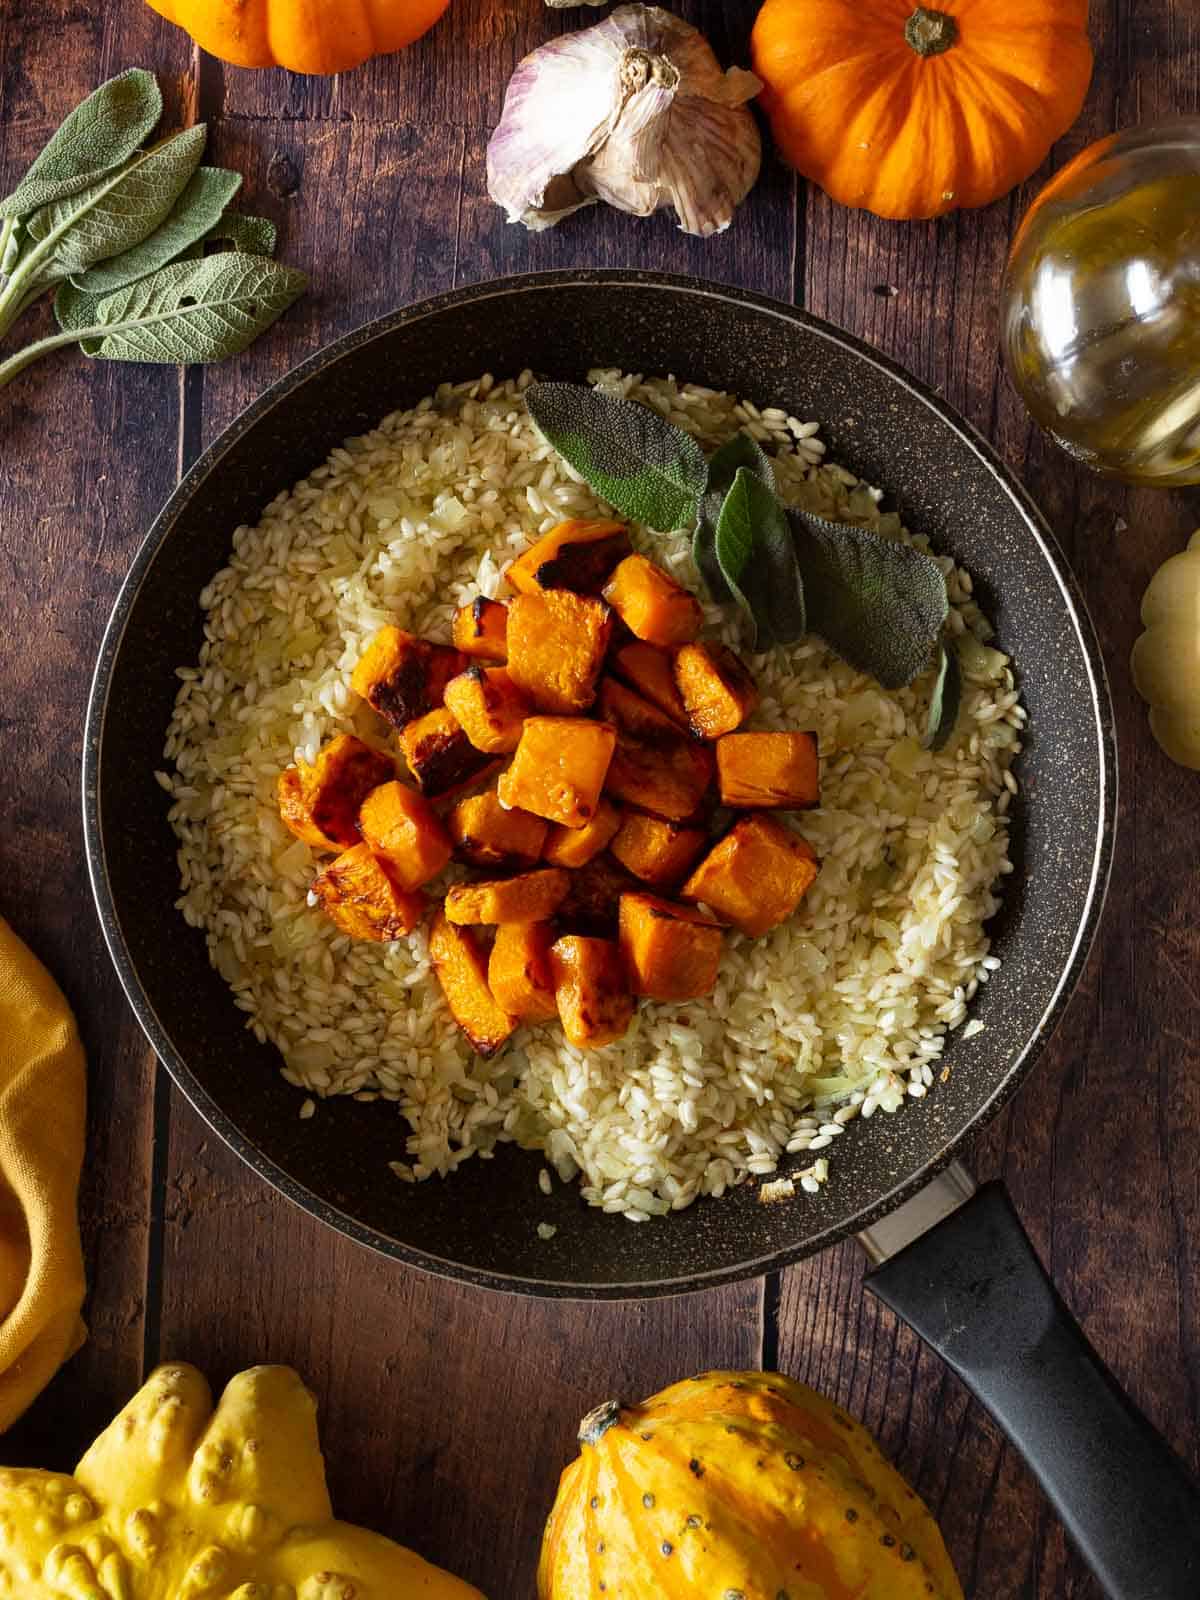 add roasted pumpkin dice while rice is cooking